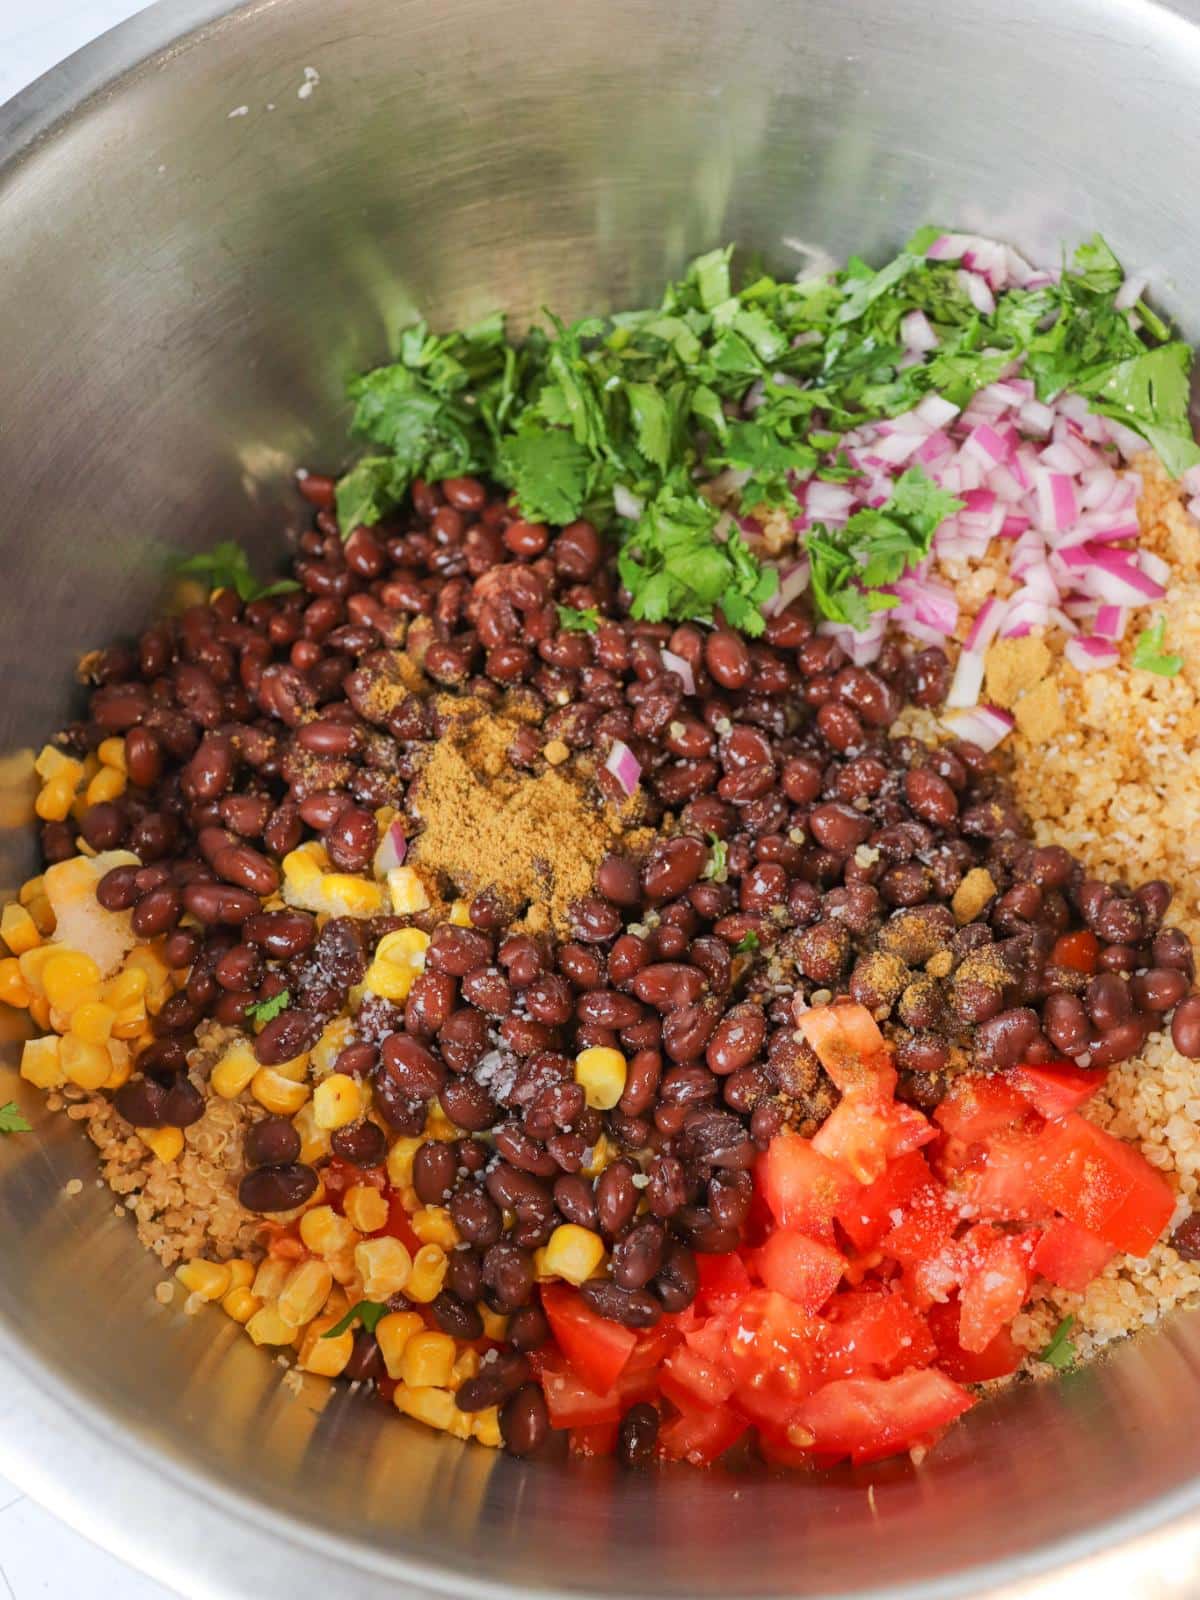 All the ingredients for quinoa black bean salad in a large metal mixing bowl before getting mixed.